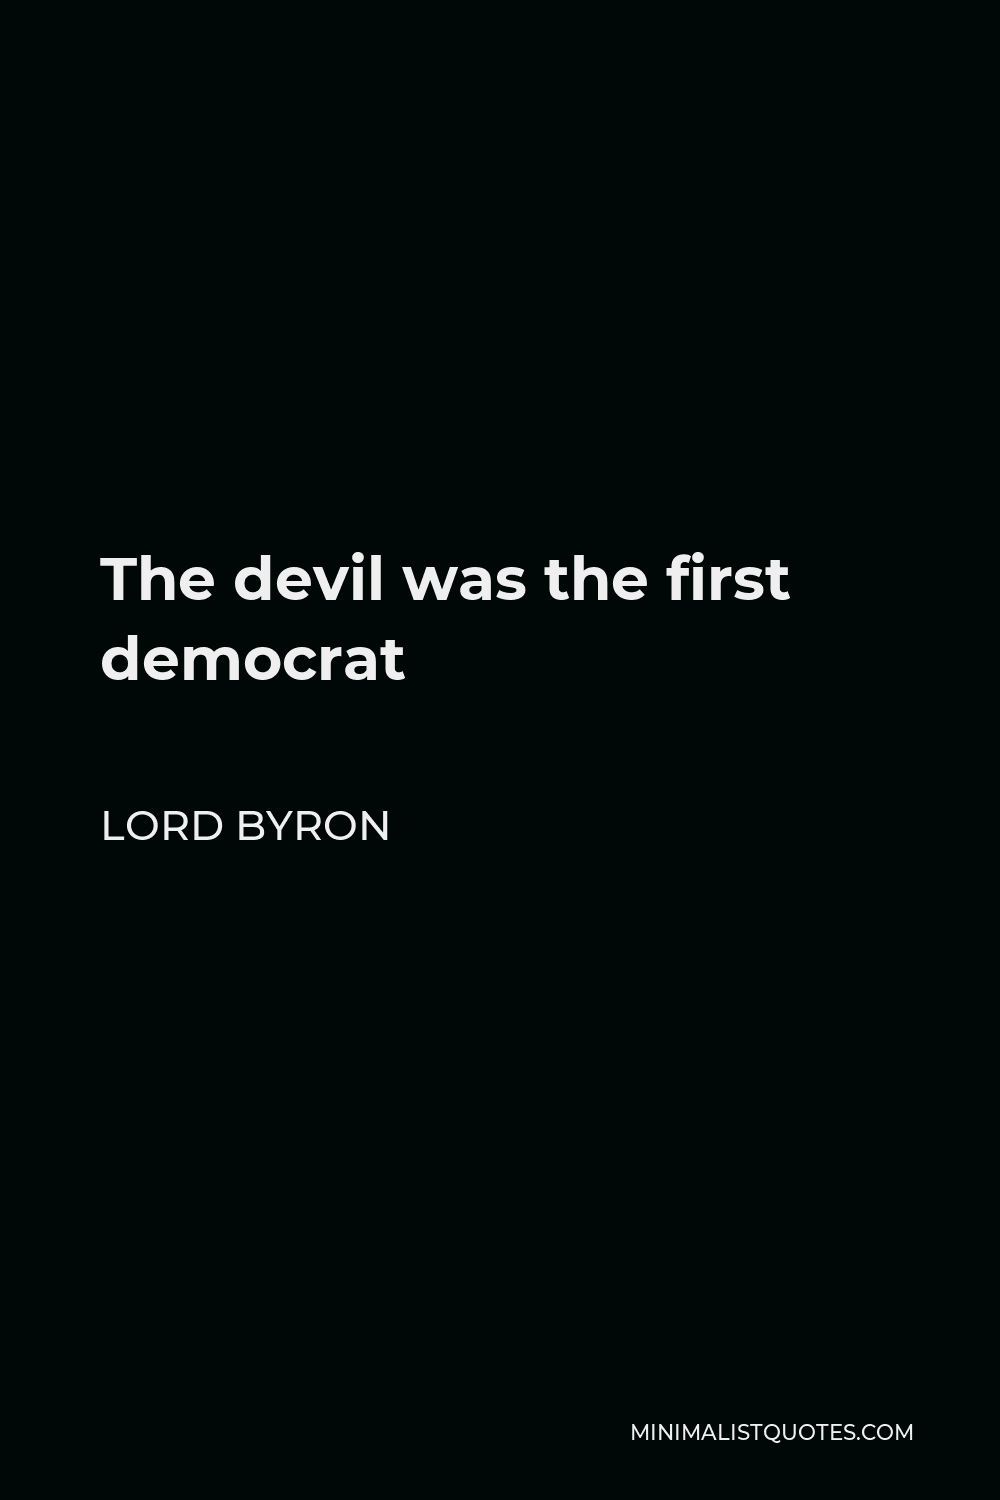 Lord Byron Quote - The devil was the first democrat